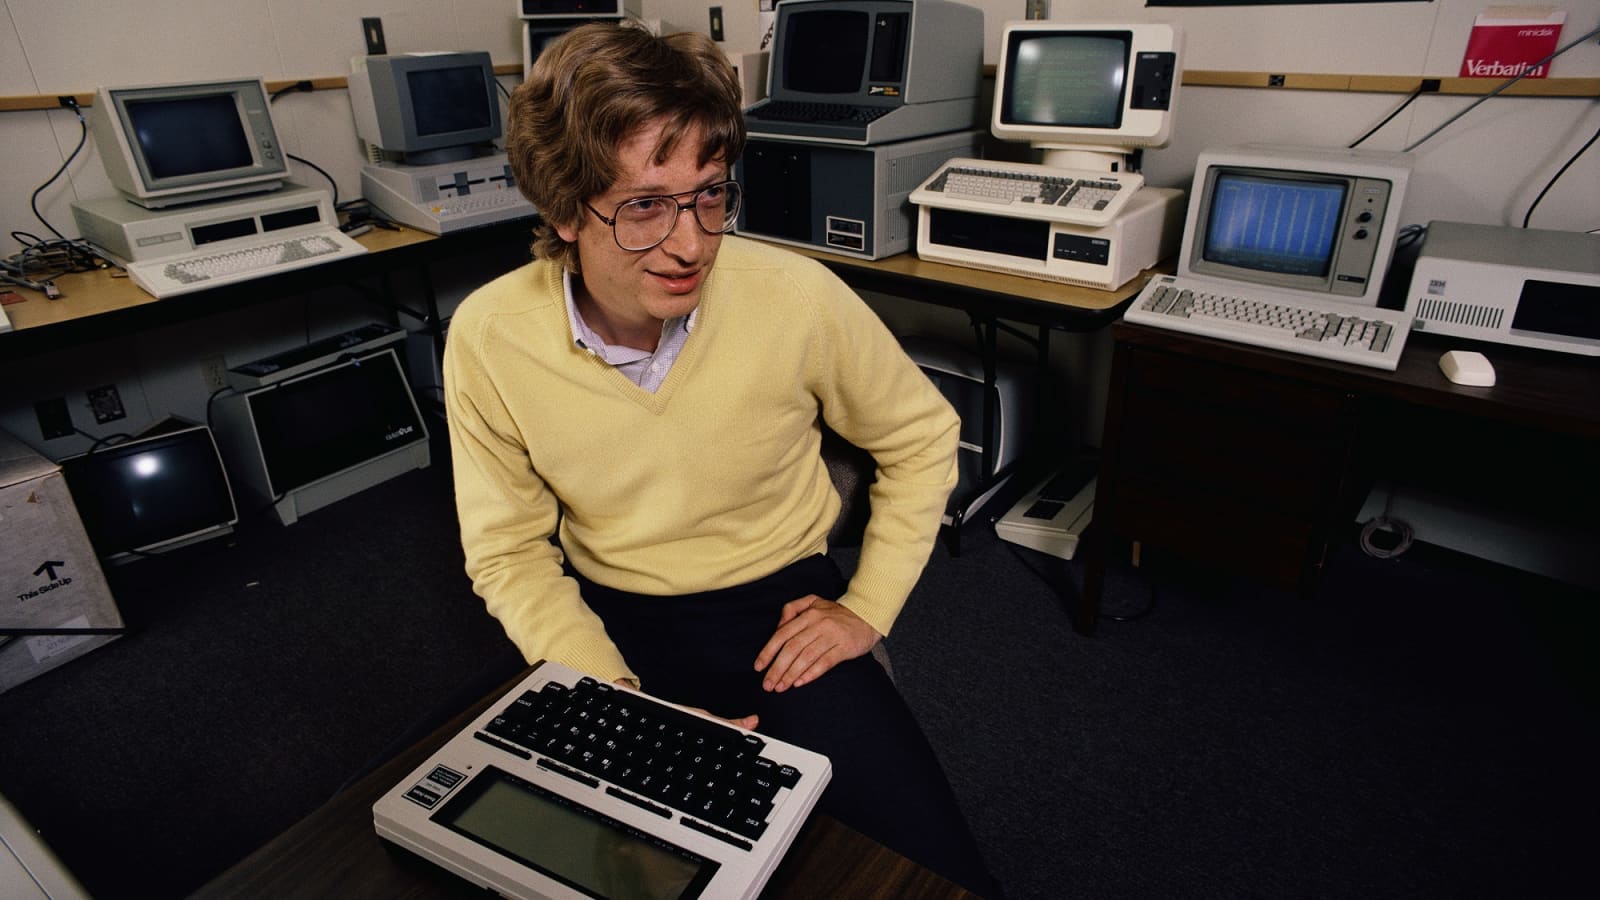 28-year-old Bill Gates said he wouldn't burn out by the time he was 30